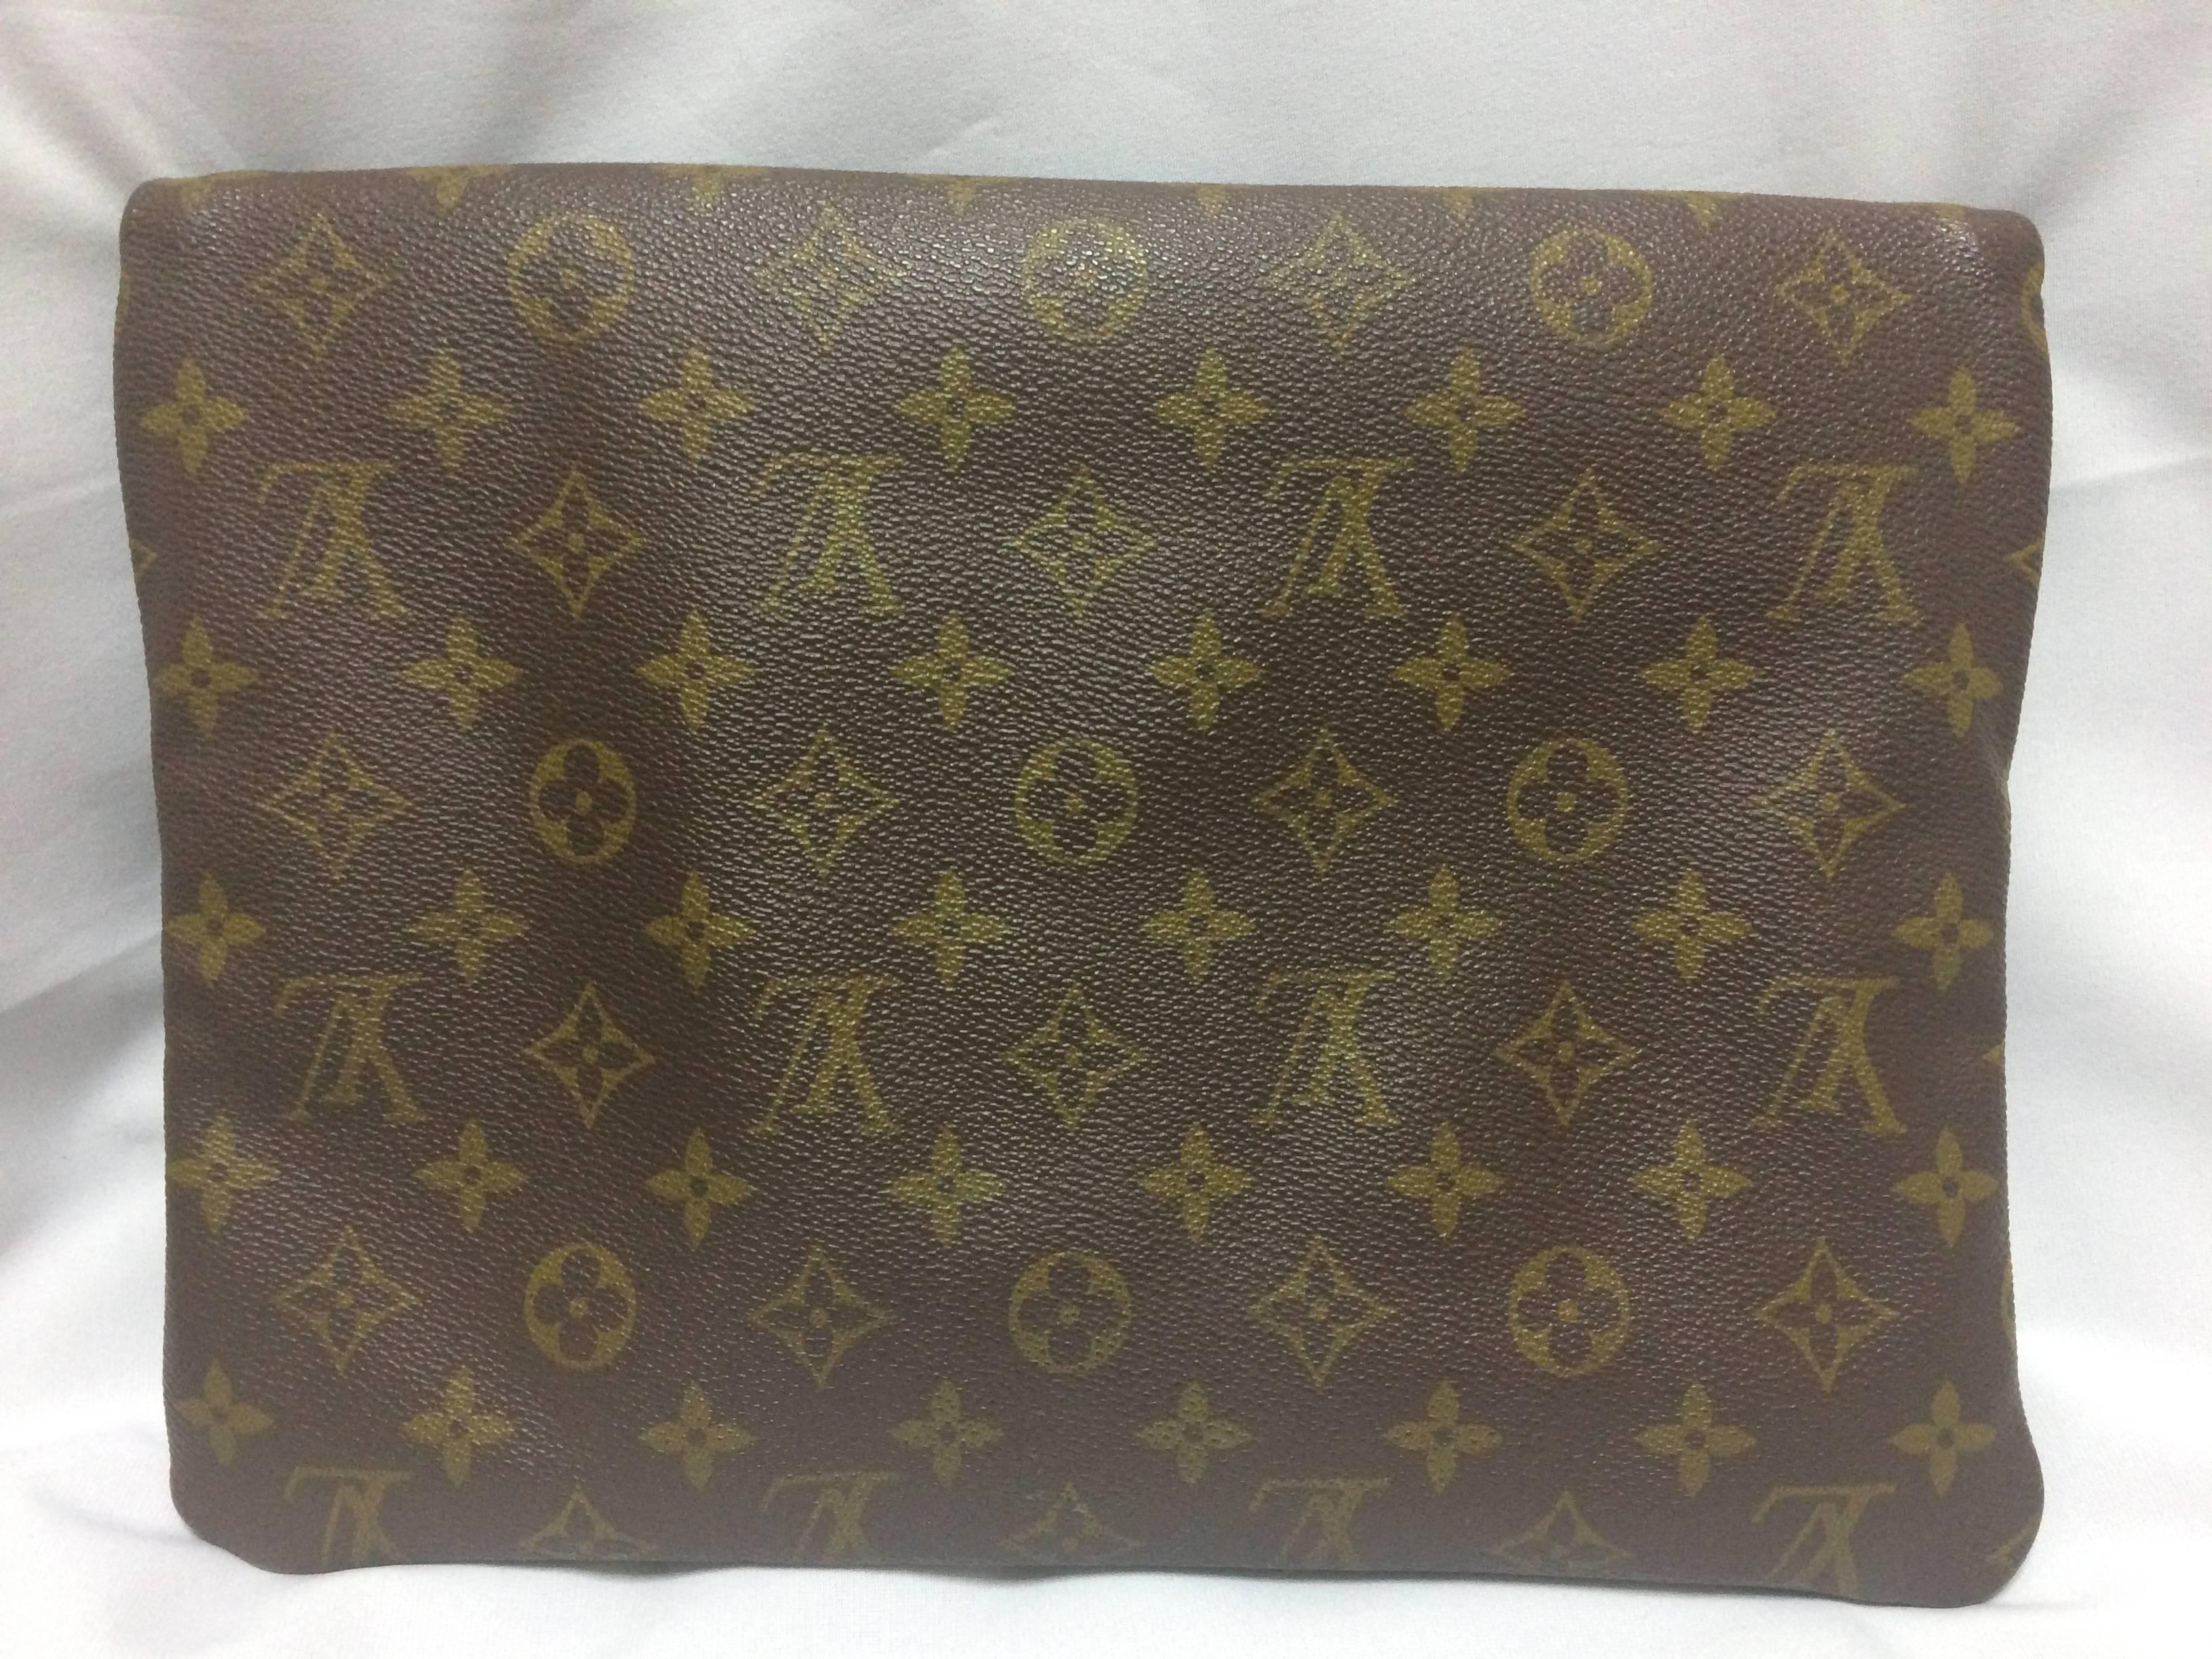 1970's, 80's vintage Louis Vuitton monogram envelope style document portfolio purse. Unisex use for all generations. Eclair zipper.  

Take it anywhere and anytime with you for all occasion!
This is one of the rarest pieces of Louis Vuitton